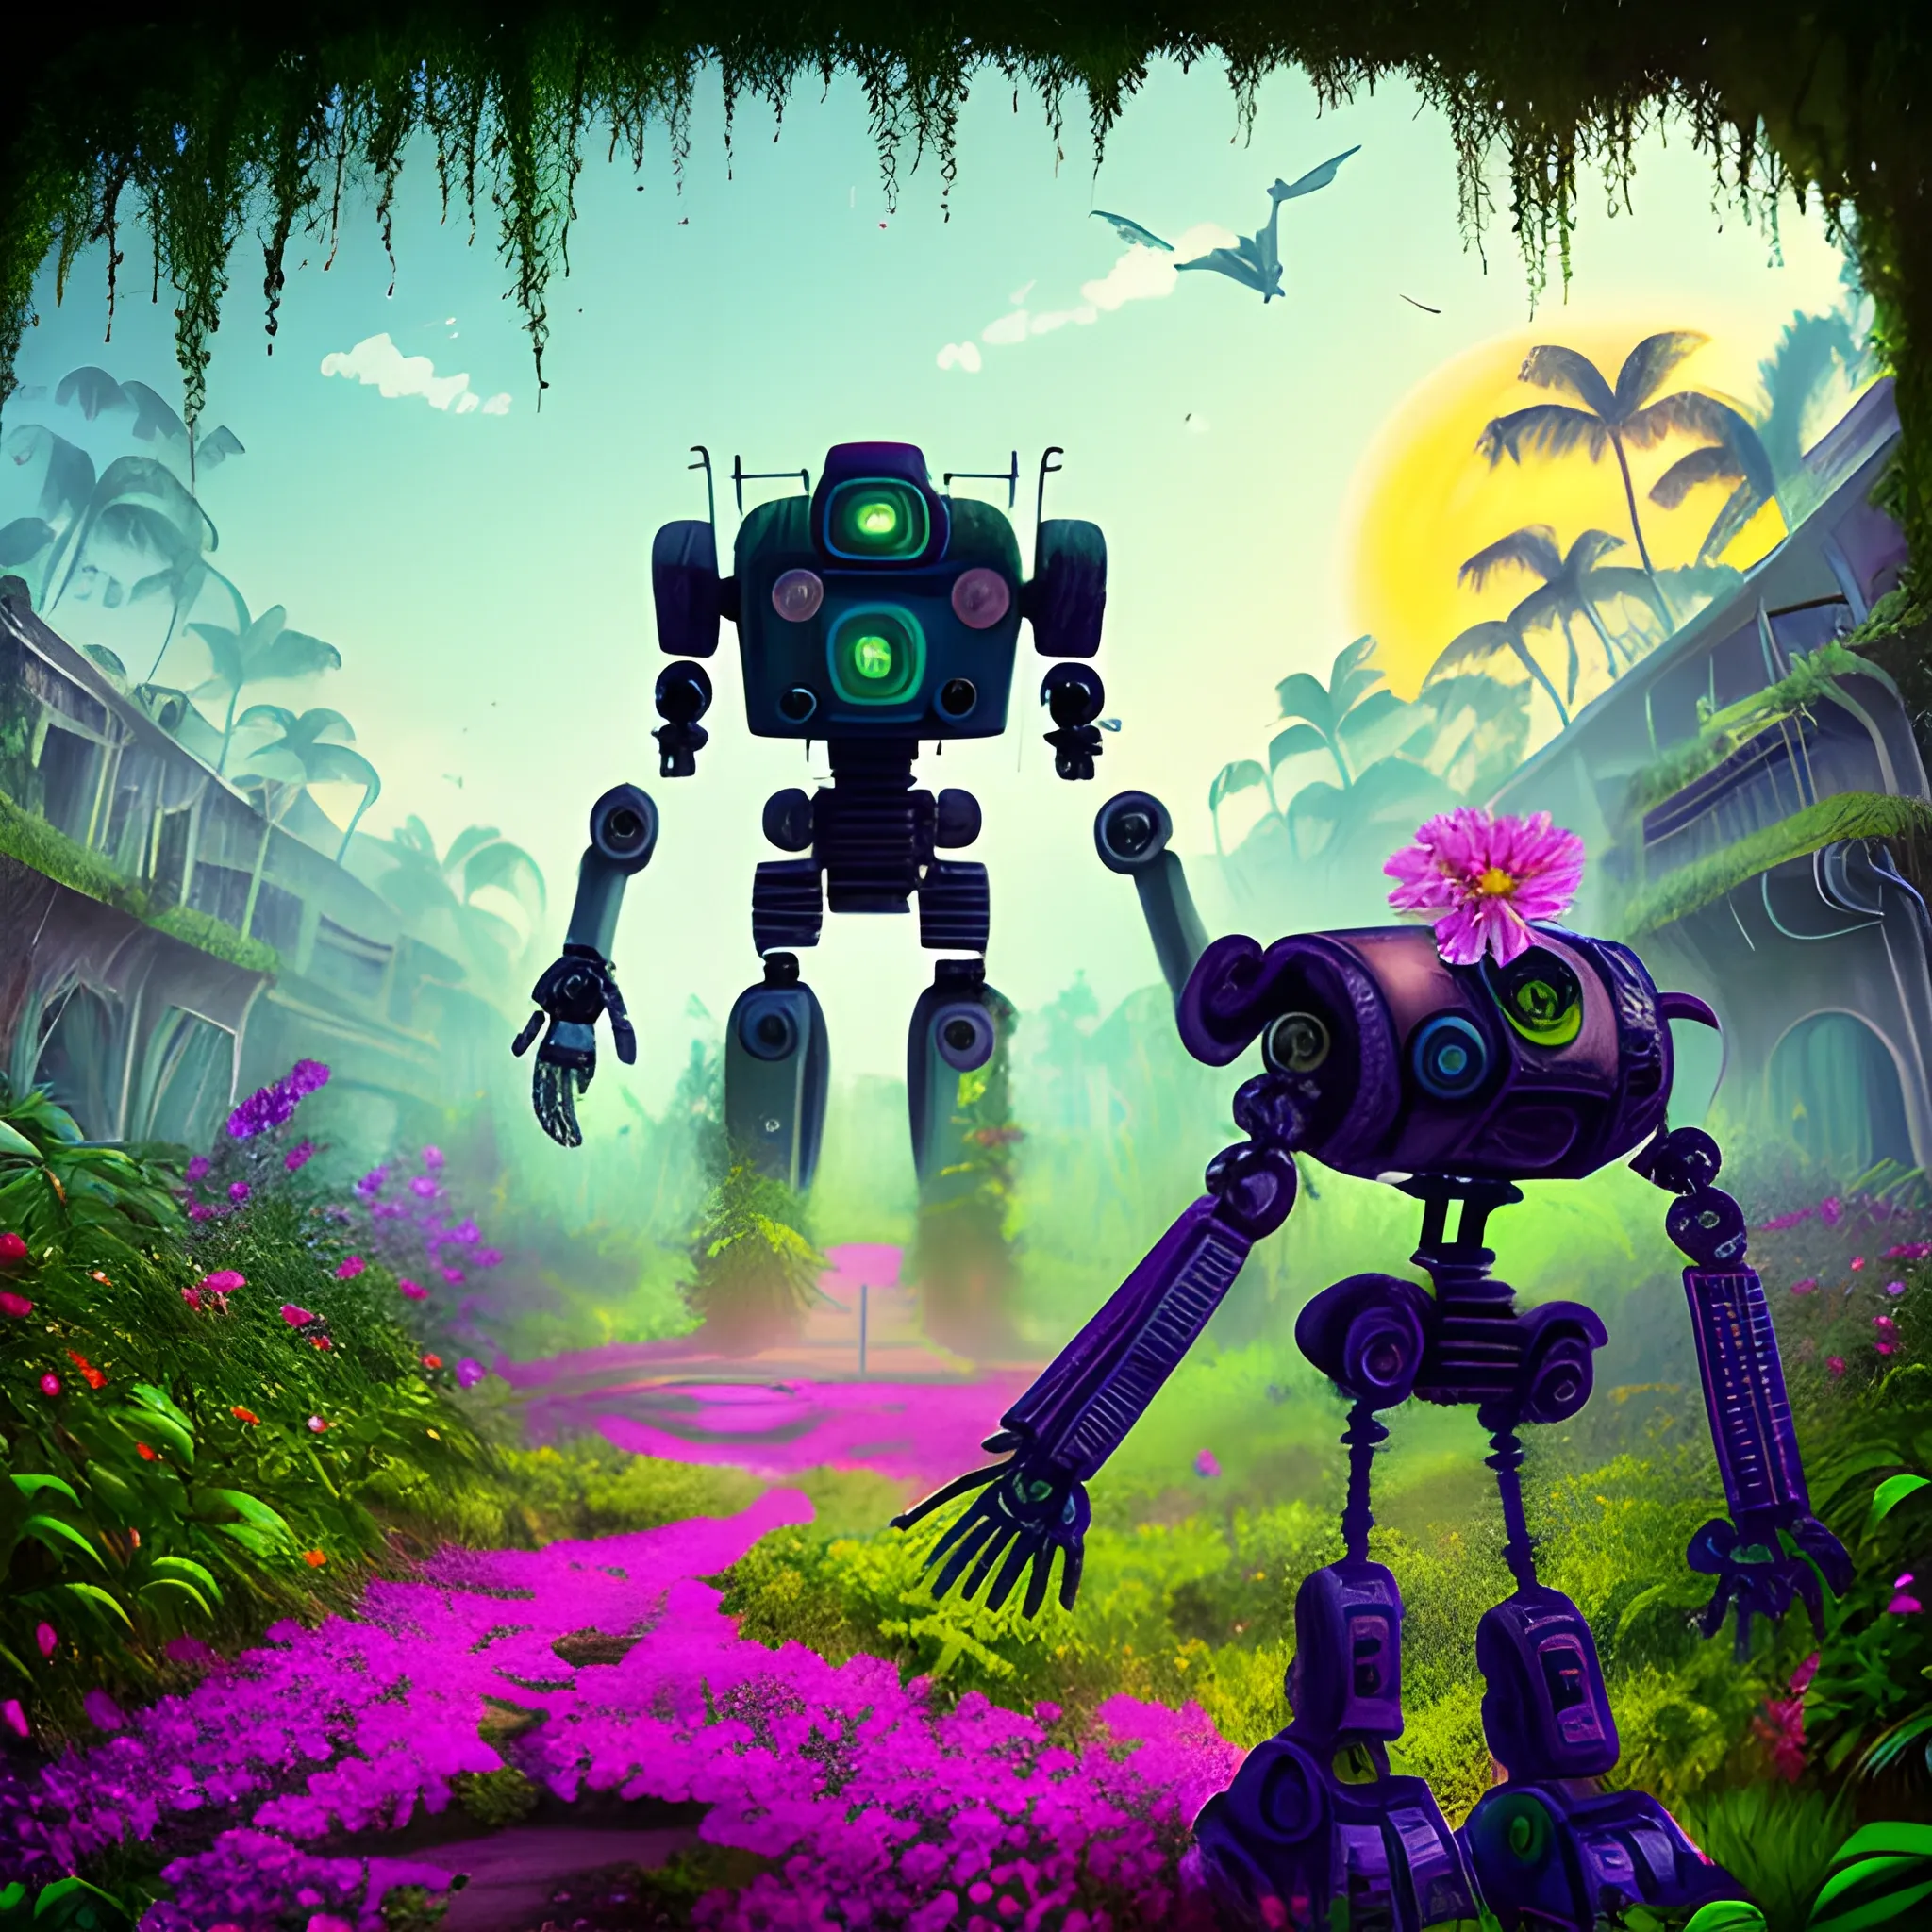 abandoned ruined city overgrown with lush vegetation with very colorful flowers and a very sophisticated robot walking towards the horizon of a setting sun, Trippy